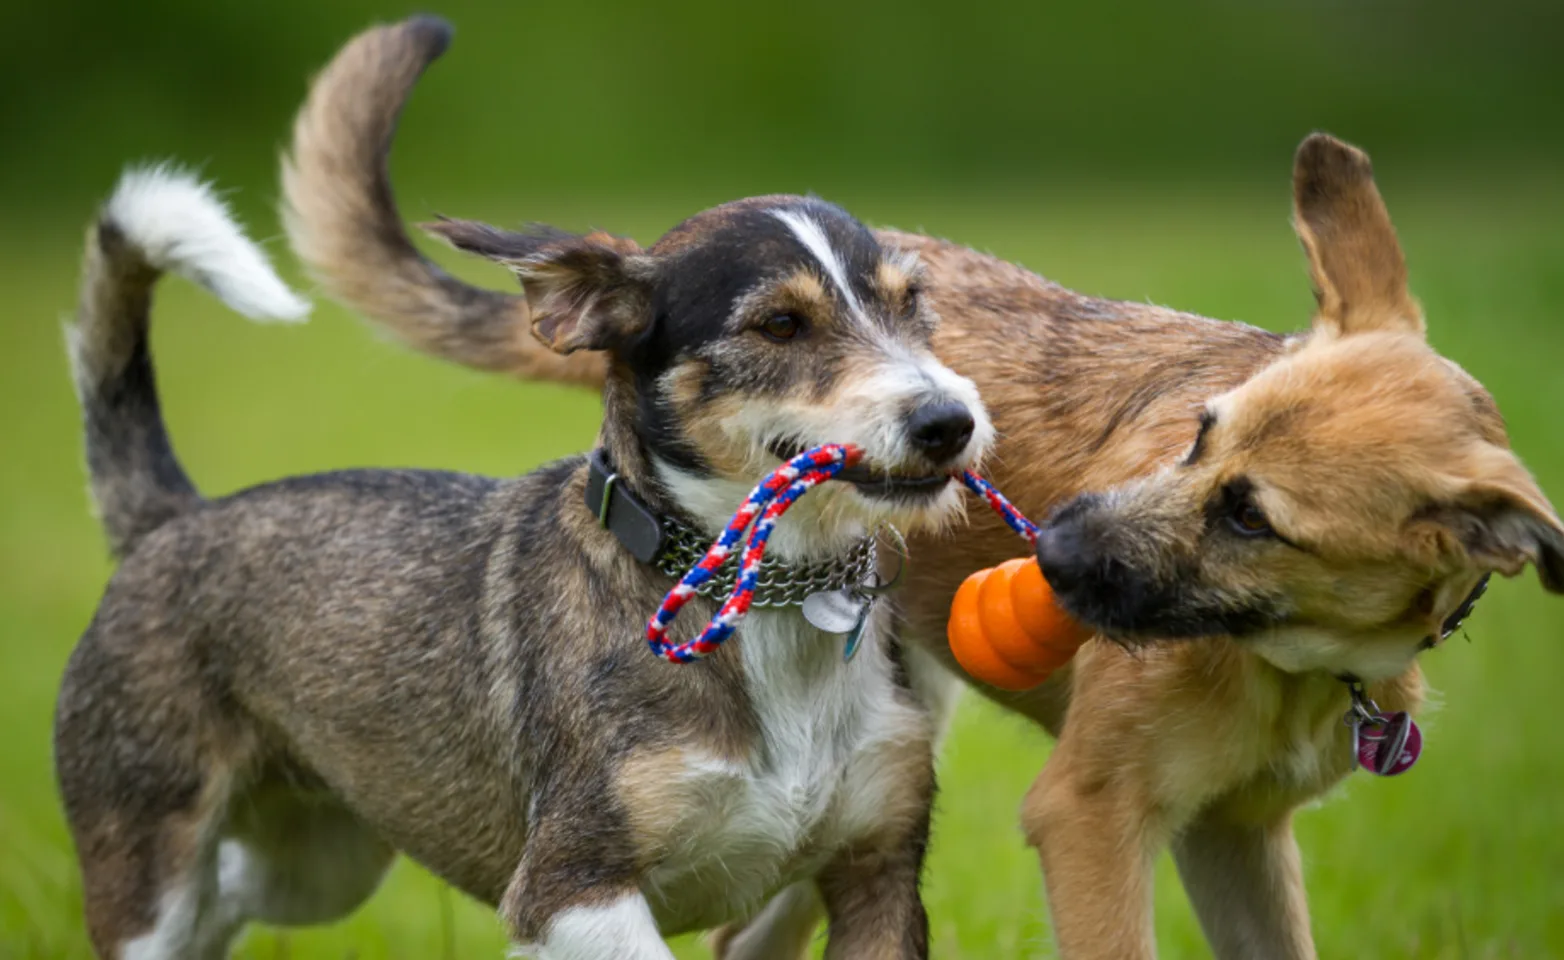 Two dogs playing with a toy in grass